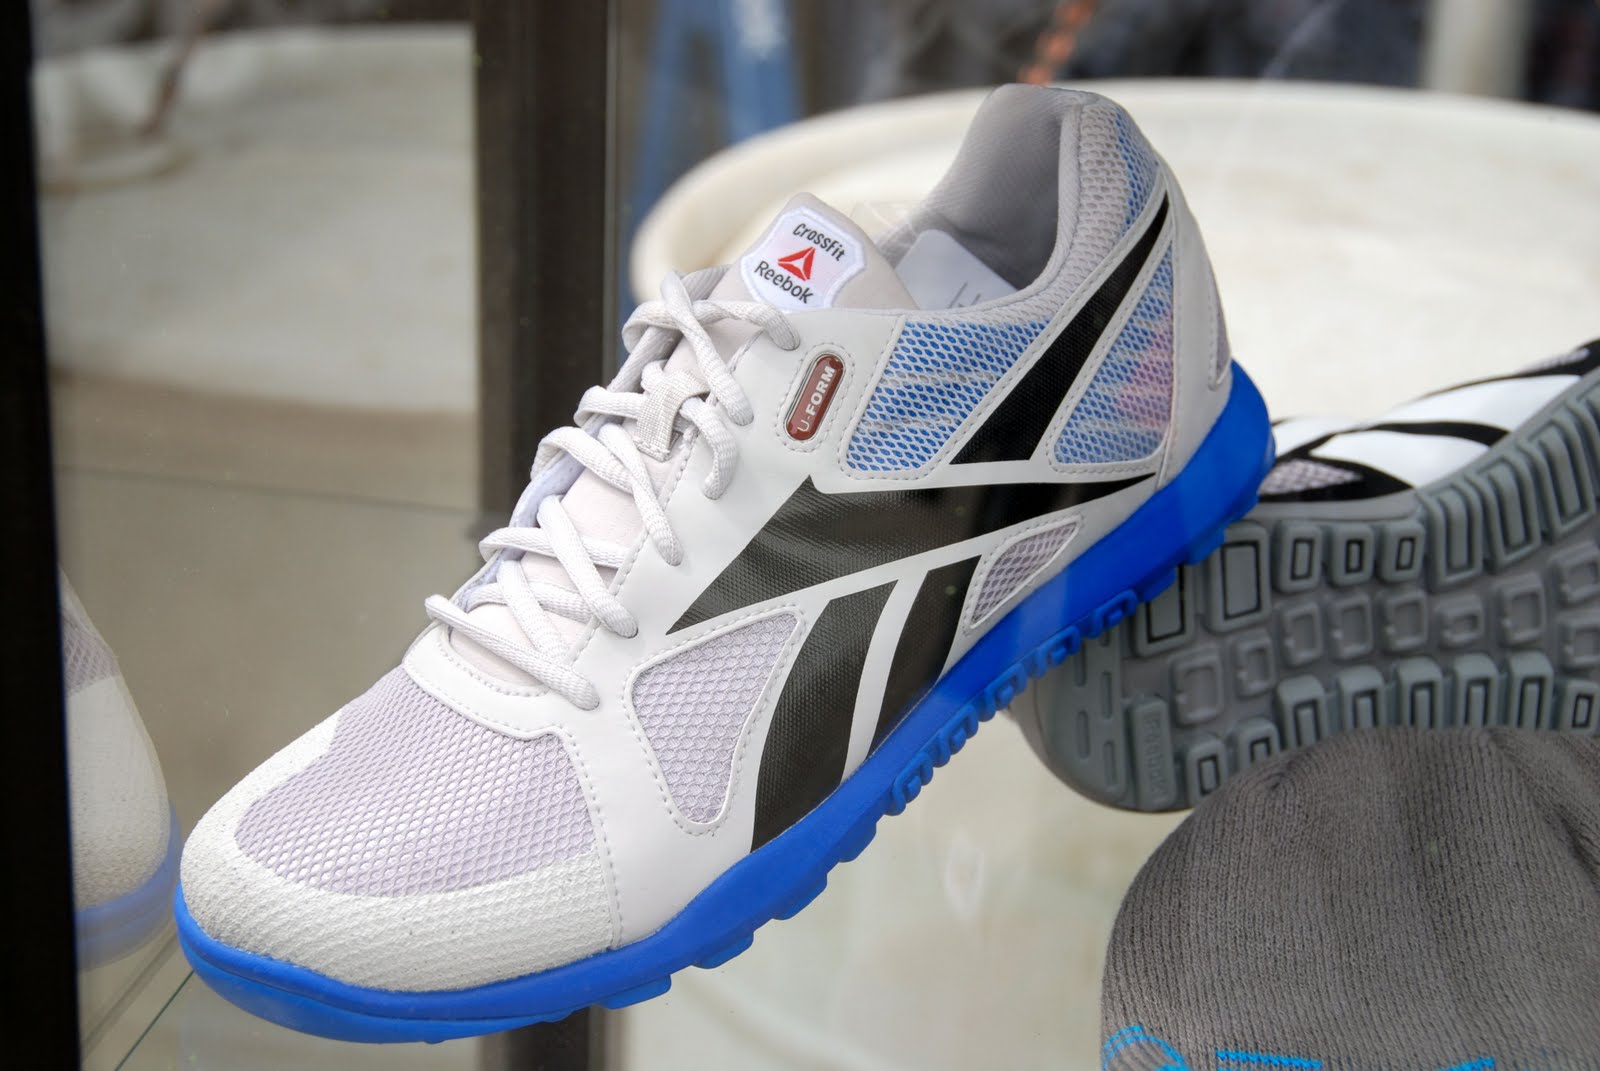 Where Can You Buy Reebok Crossfit Shoes